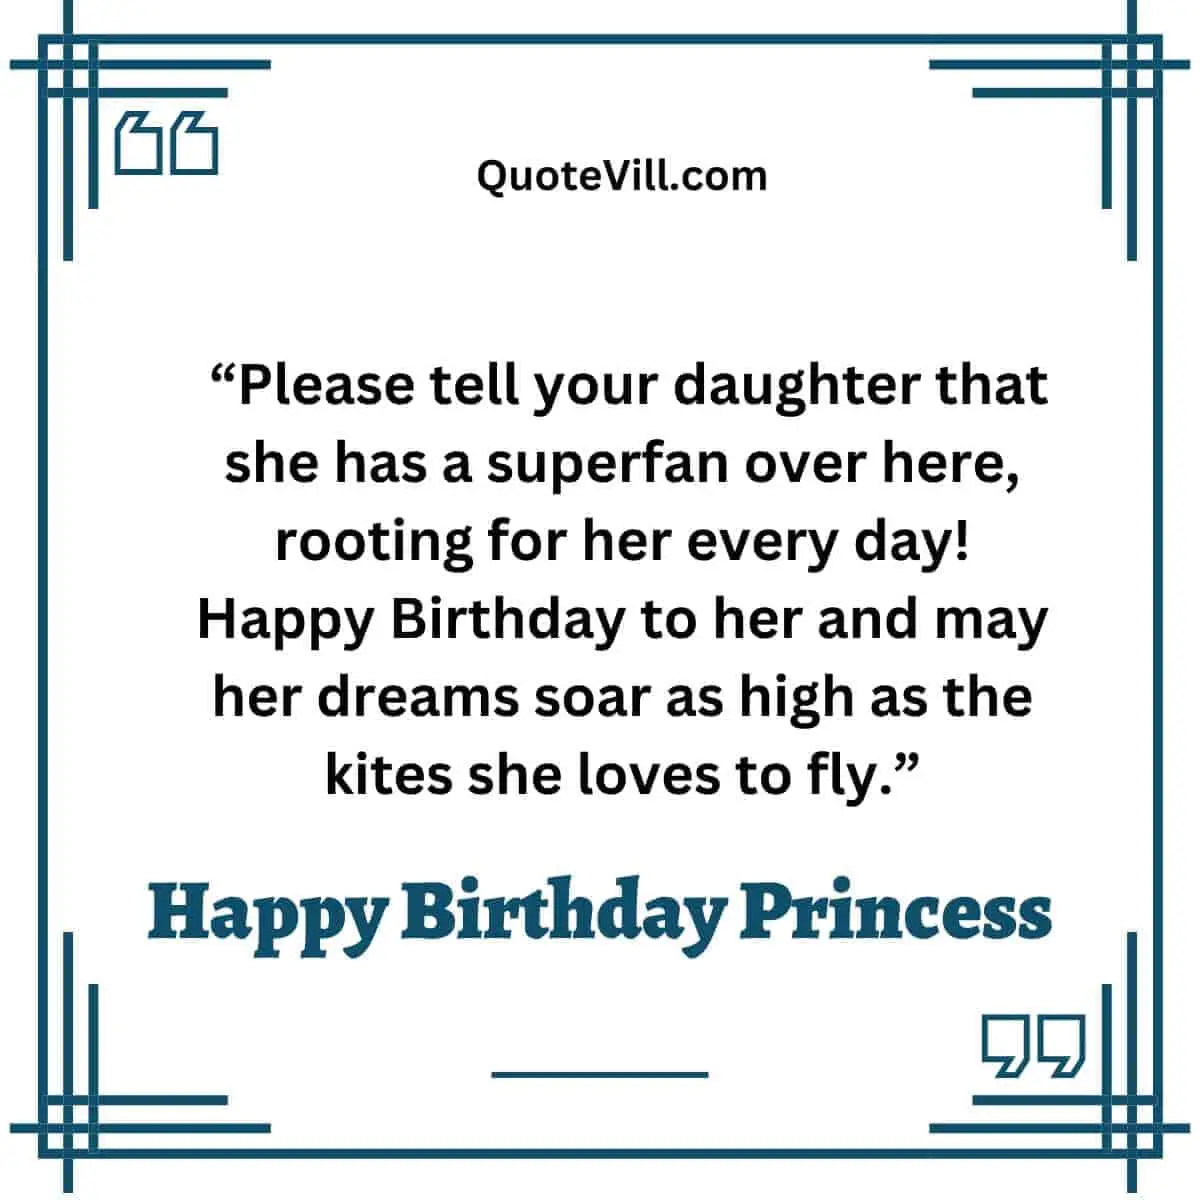 Friend-Convey-My-Birthday-Wishes-To-Your-Daughter